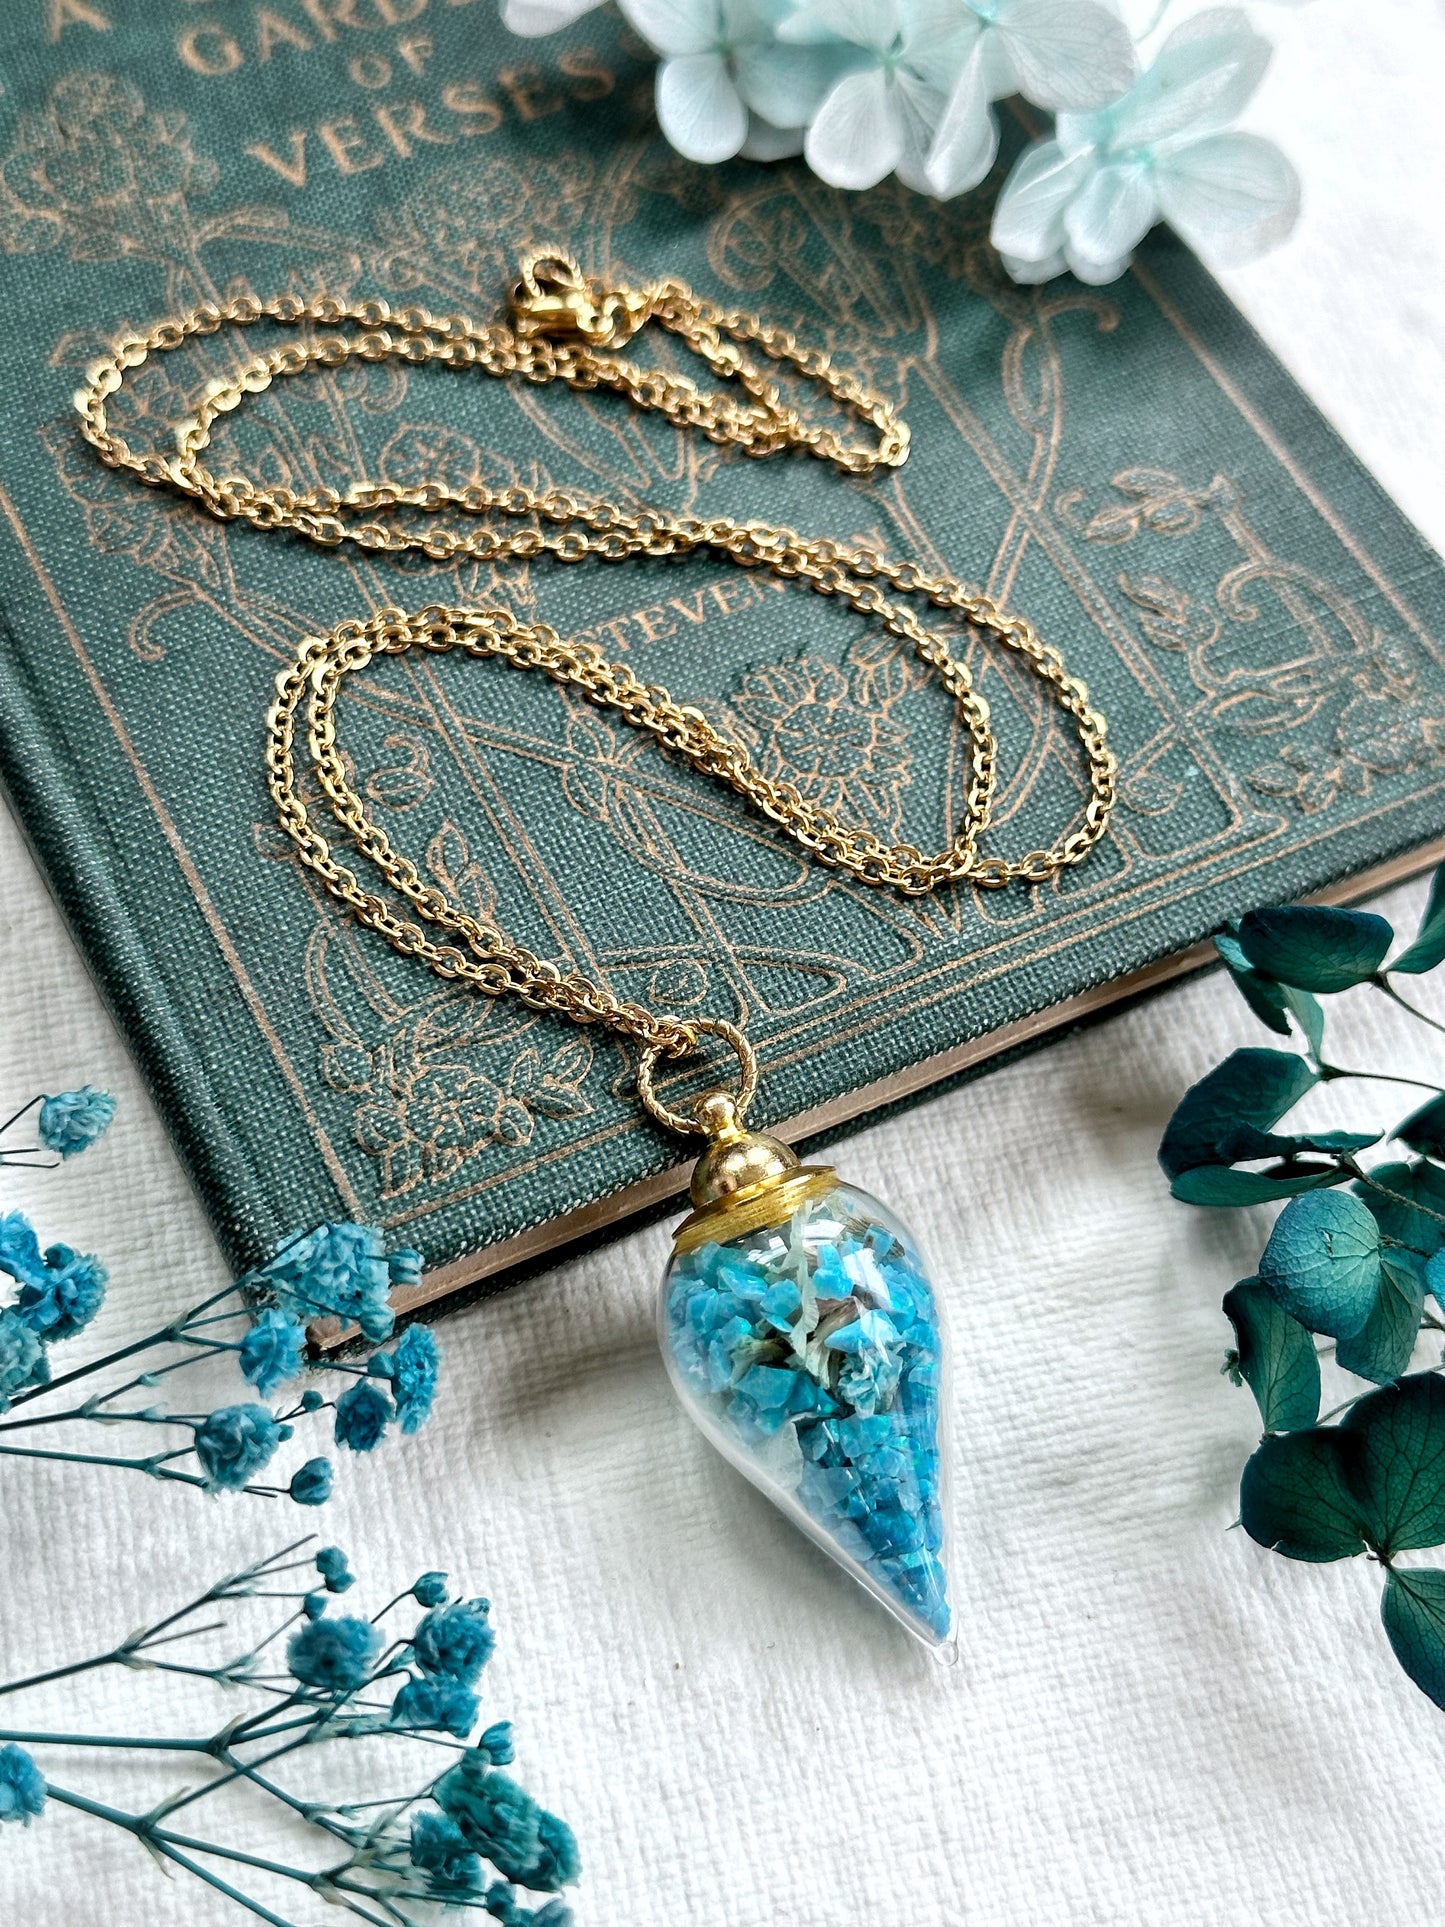 Blue Opal Serenity Apothecary Necklace